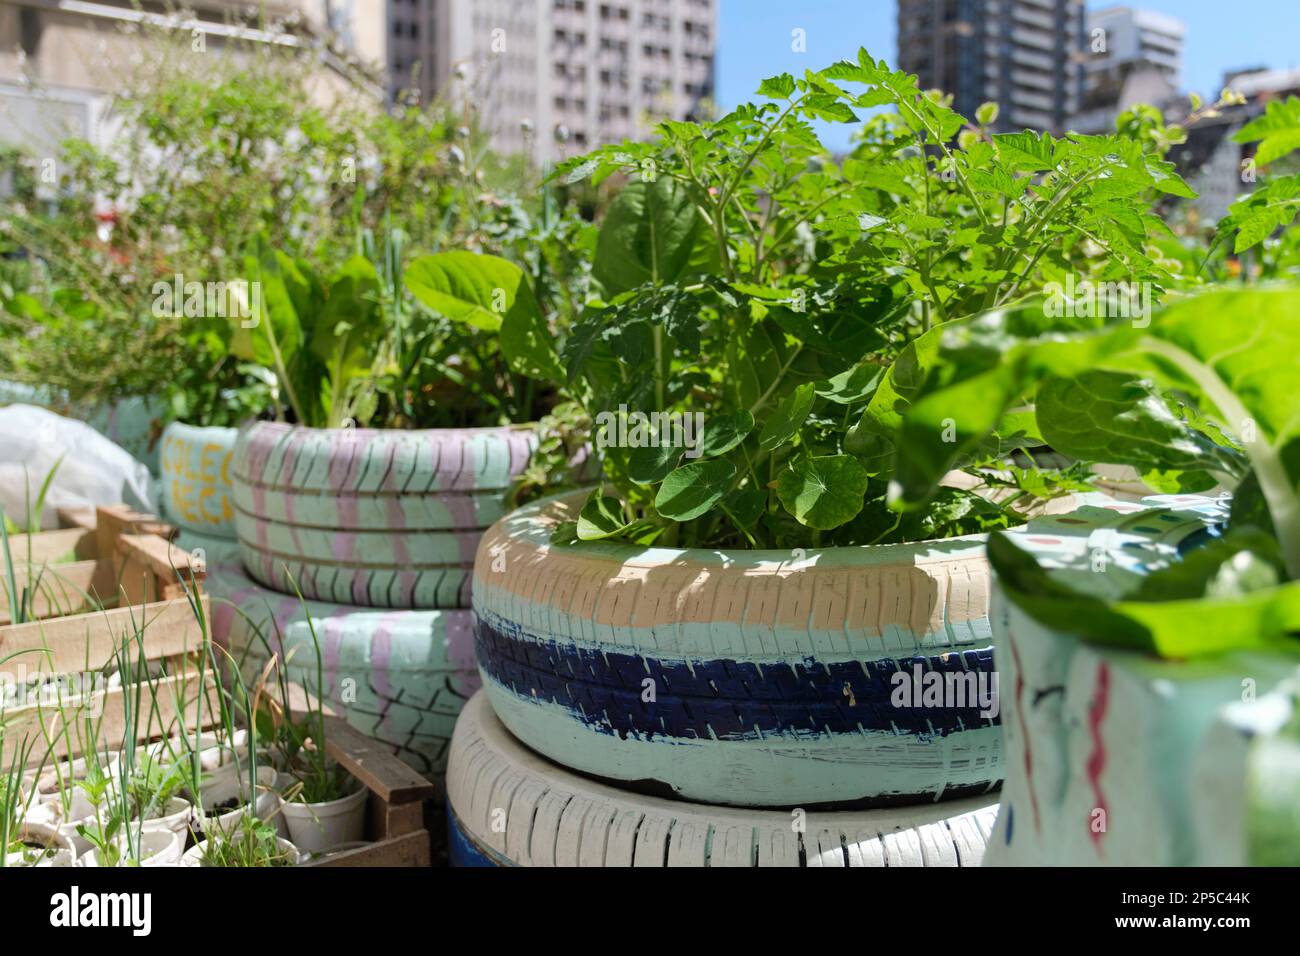 Edible plants planted in reused old tires in an urban vegetable garden, sustainable production of healthy food in the city. Concepts of sustainable ag Stock Photo